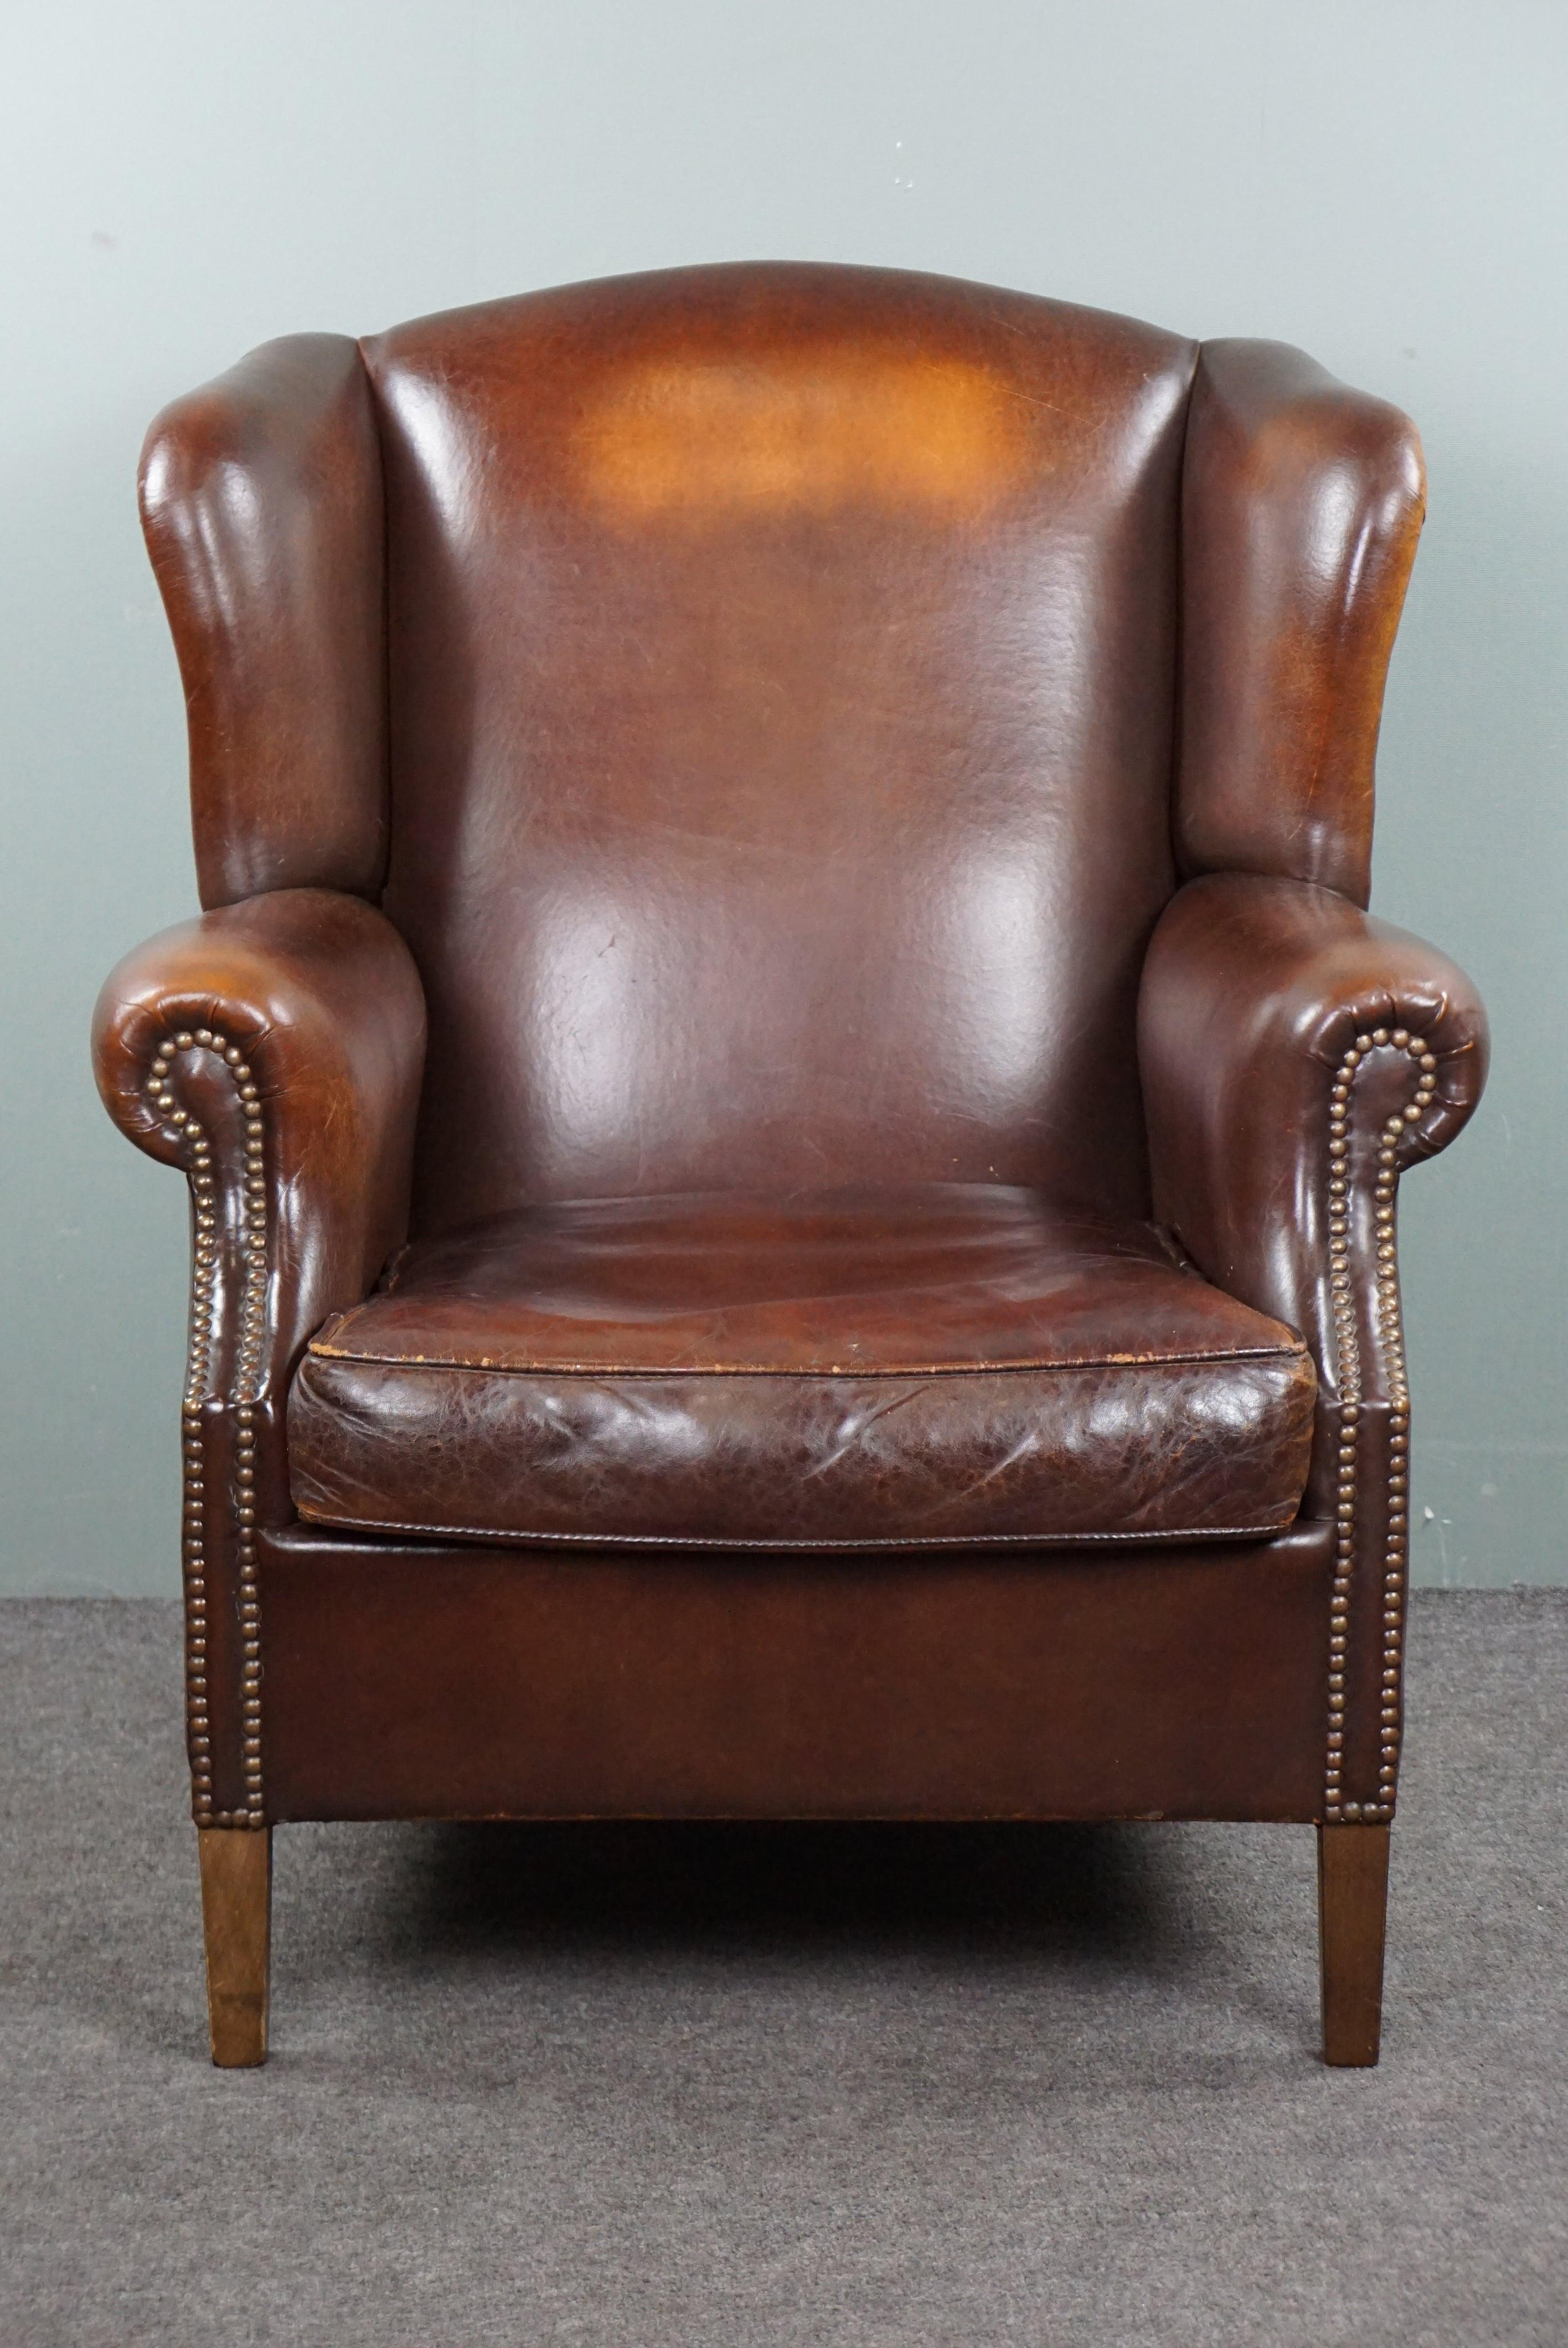 Offered is this beautiful sheep leather wing chair finished with beautiful decorative nails.

This pearl has a beautiful warm color and a beautiful patina.
Anyone who takes this unique eye-catcher into their home is assured of a wonderfully seated